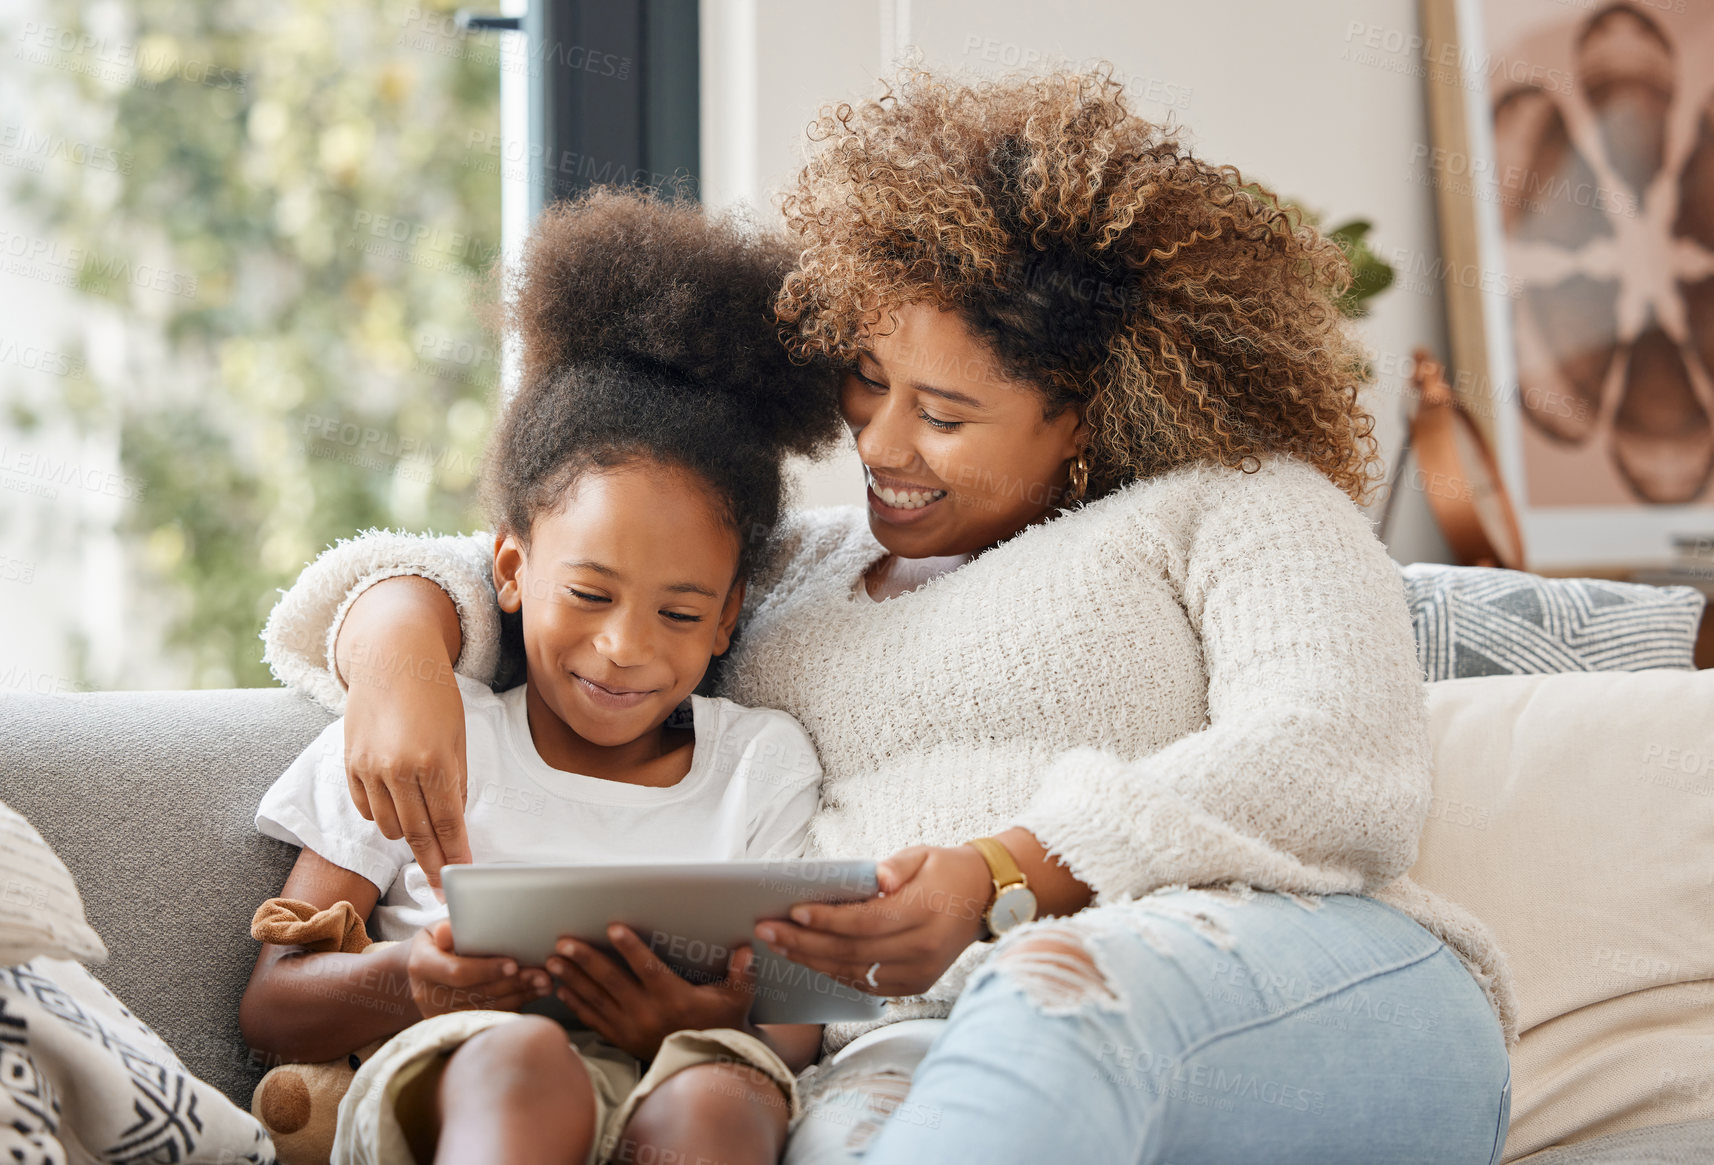 Buy stock photo Shot of a young mother using a digital tablet with her daughter at home